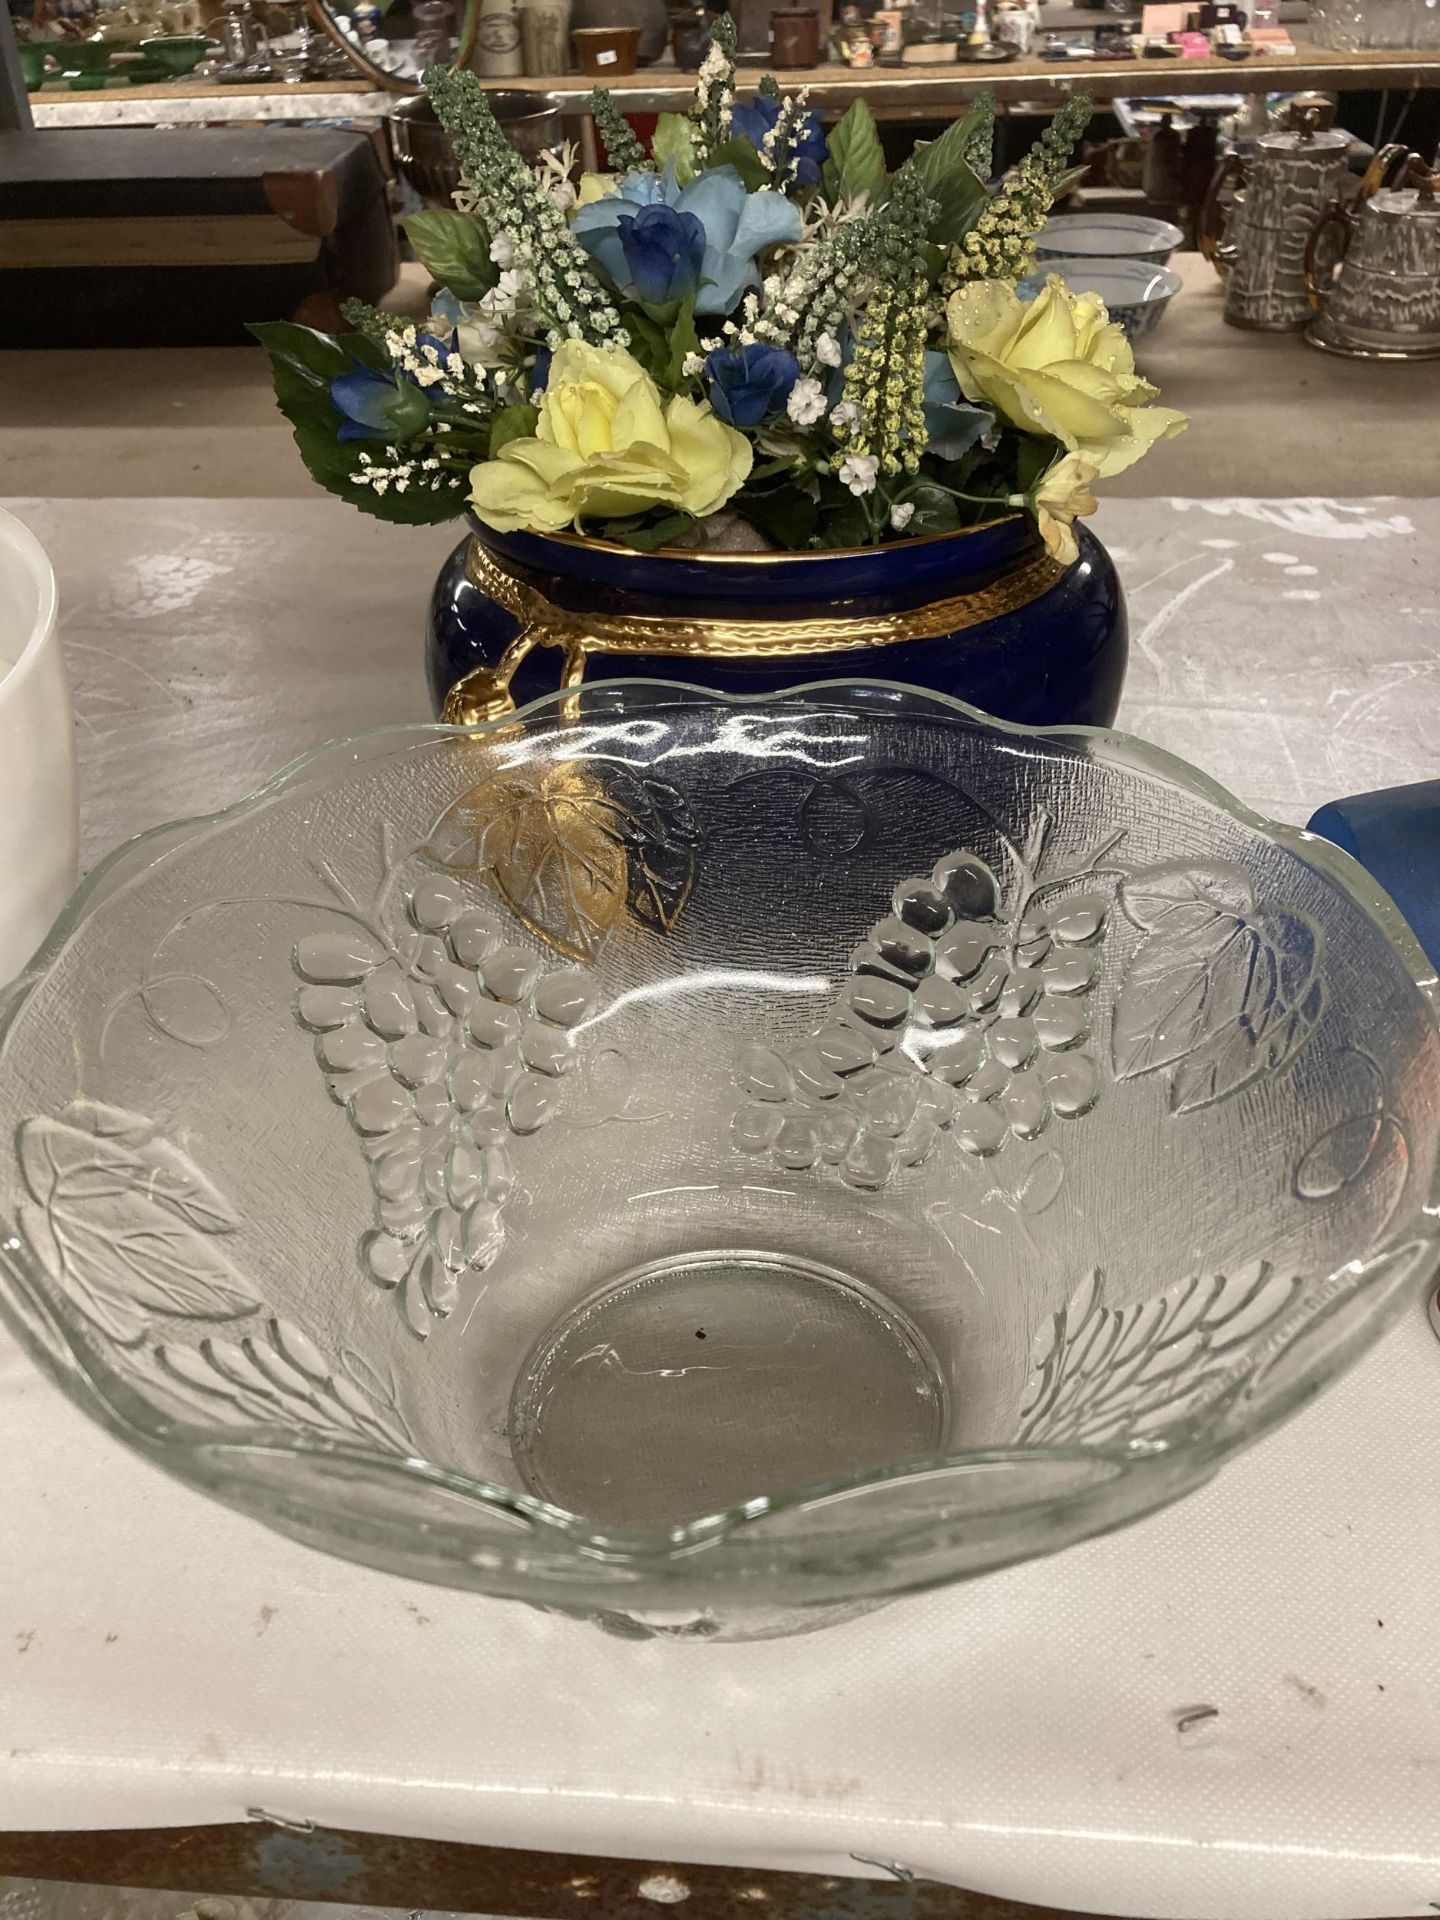 A LARGE GLASS BOWL WITH GRAPE AND VINE DECORATION AND A PLANTER CONTAINING DRIED FLOWERS